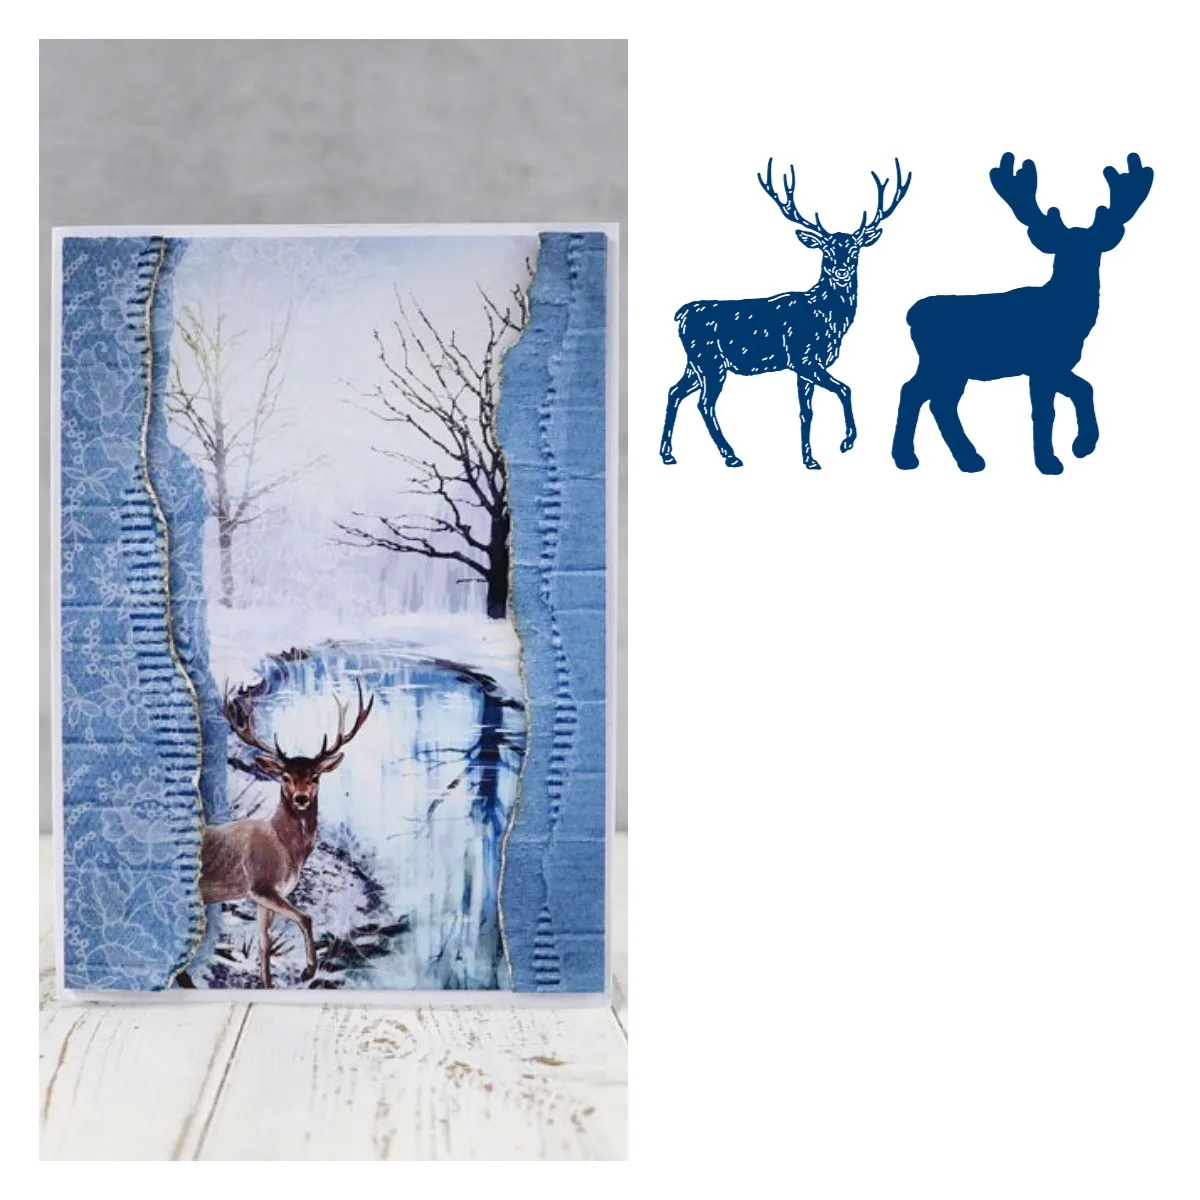 

Winter Stag Metal Cutting Dies Scrapbook Diary Decoration Stencil Embossing Template DIY Greeting Card Handmade 2021 NEW